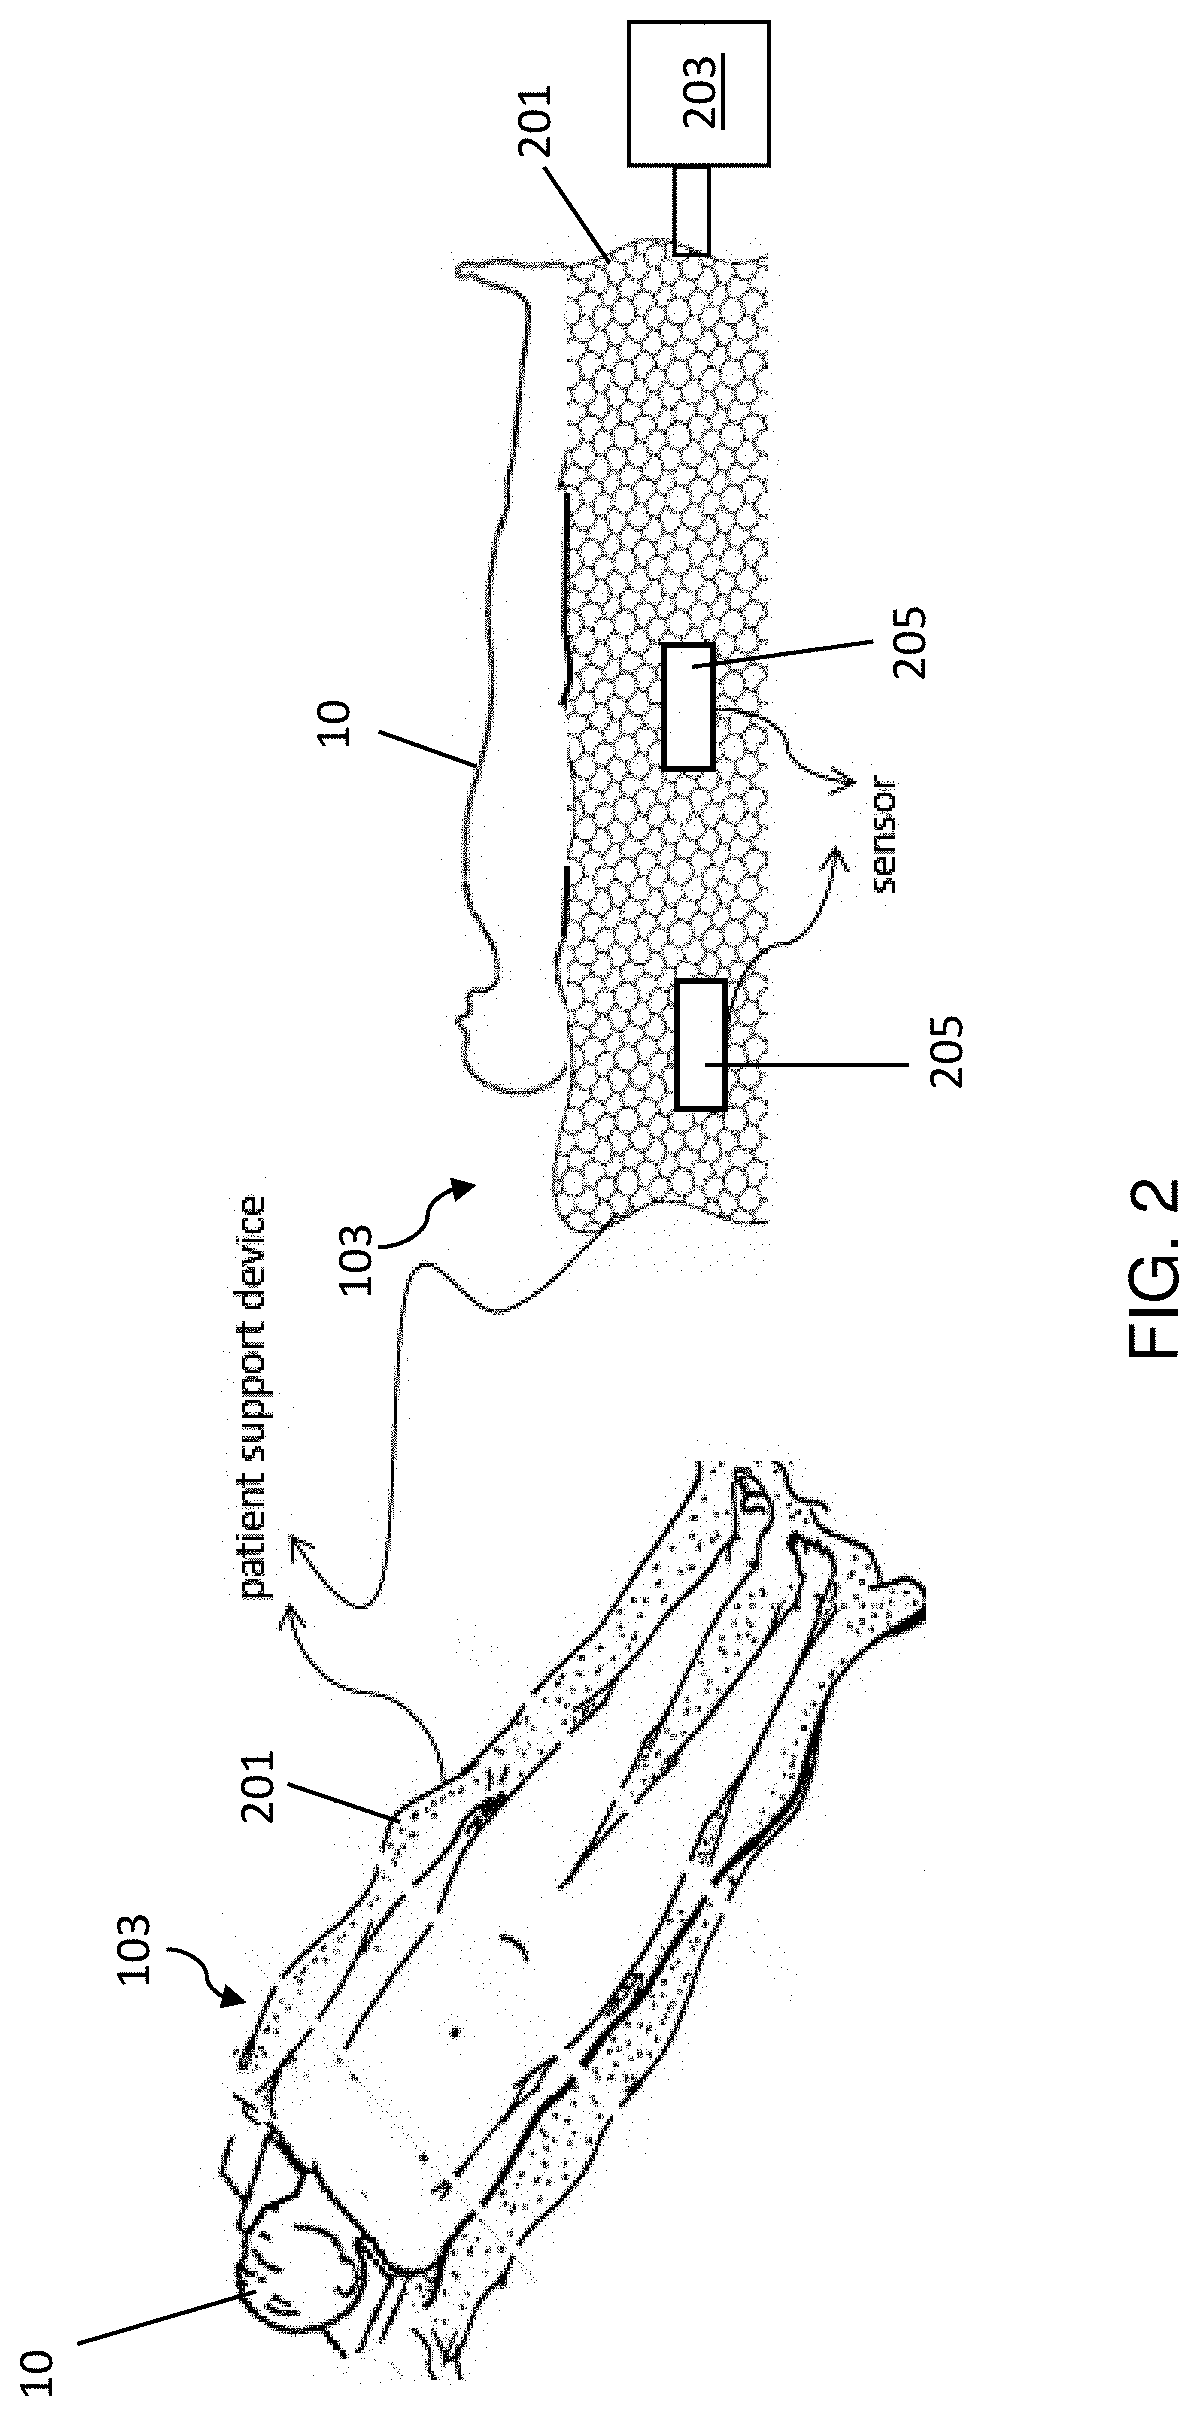 Systems and methods of body motion management during non-invasive imaging and treatment procedures